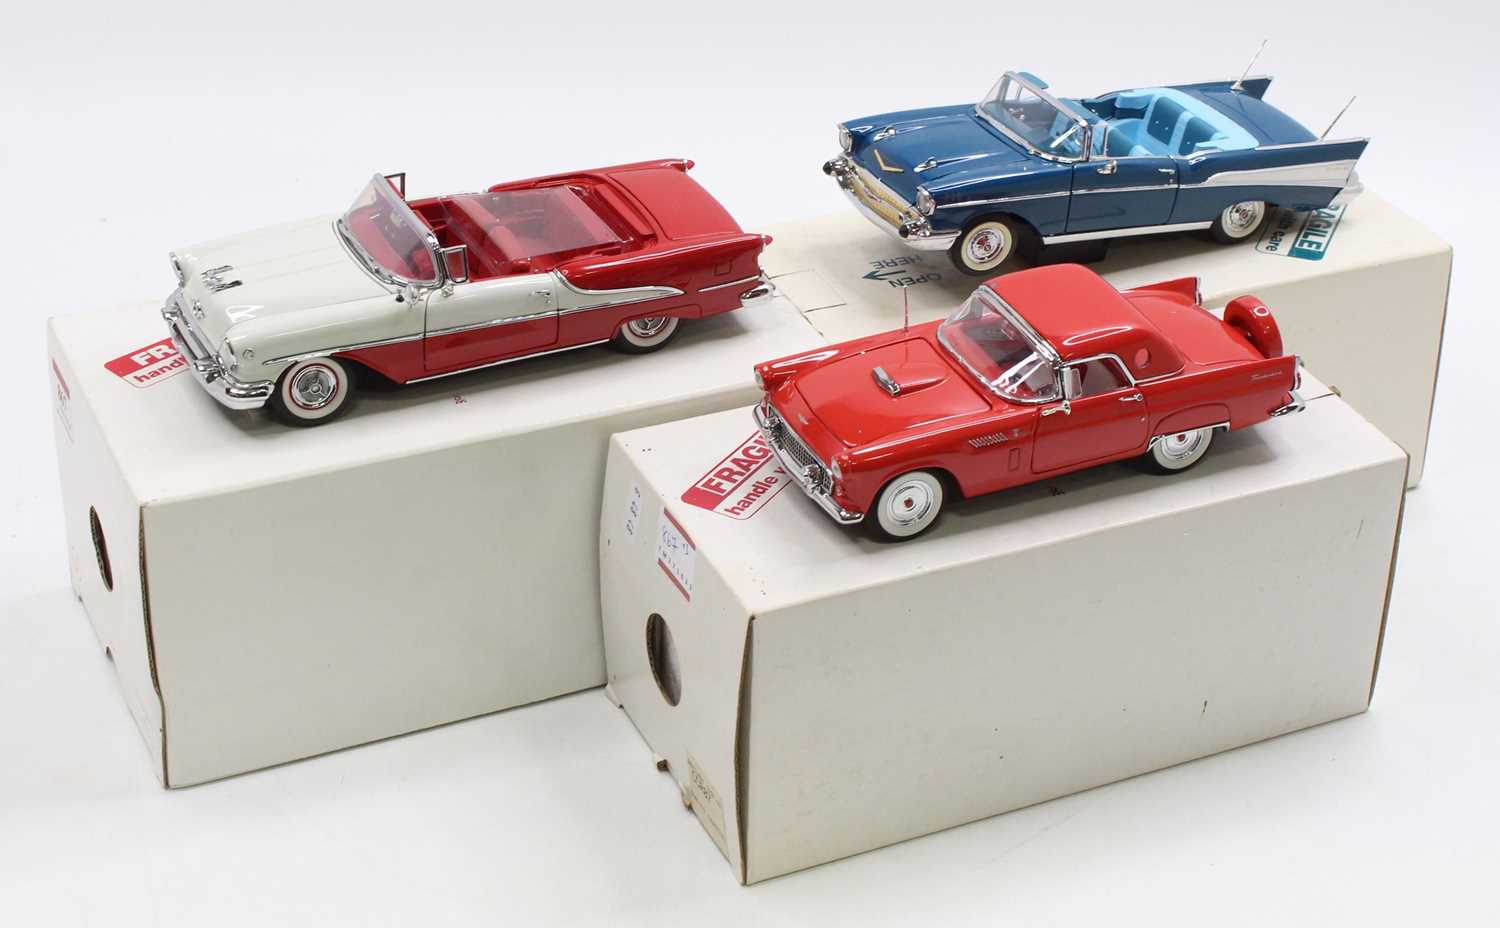 A collection of three 1/24 scale Danbury Mint 1950s diecast models to include a 1957 Chevrolet Bel